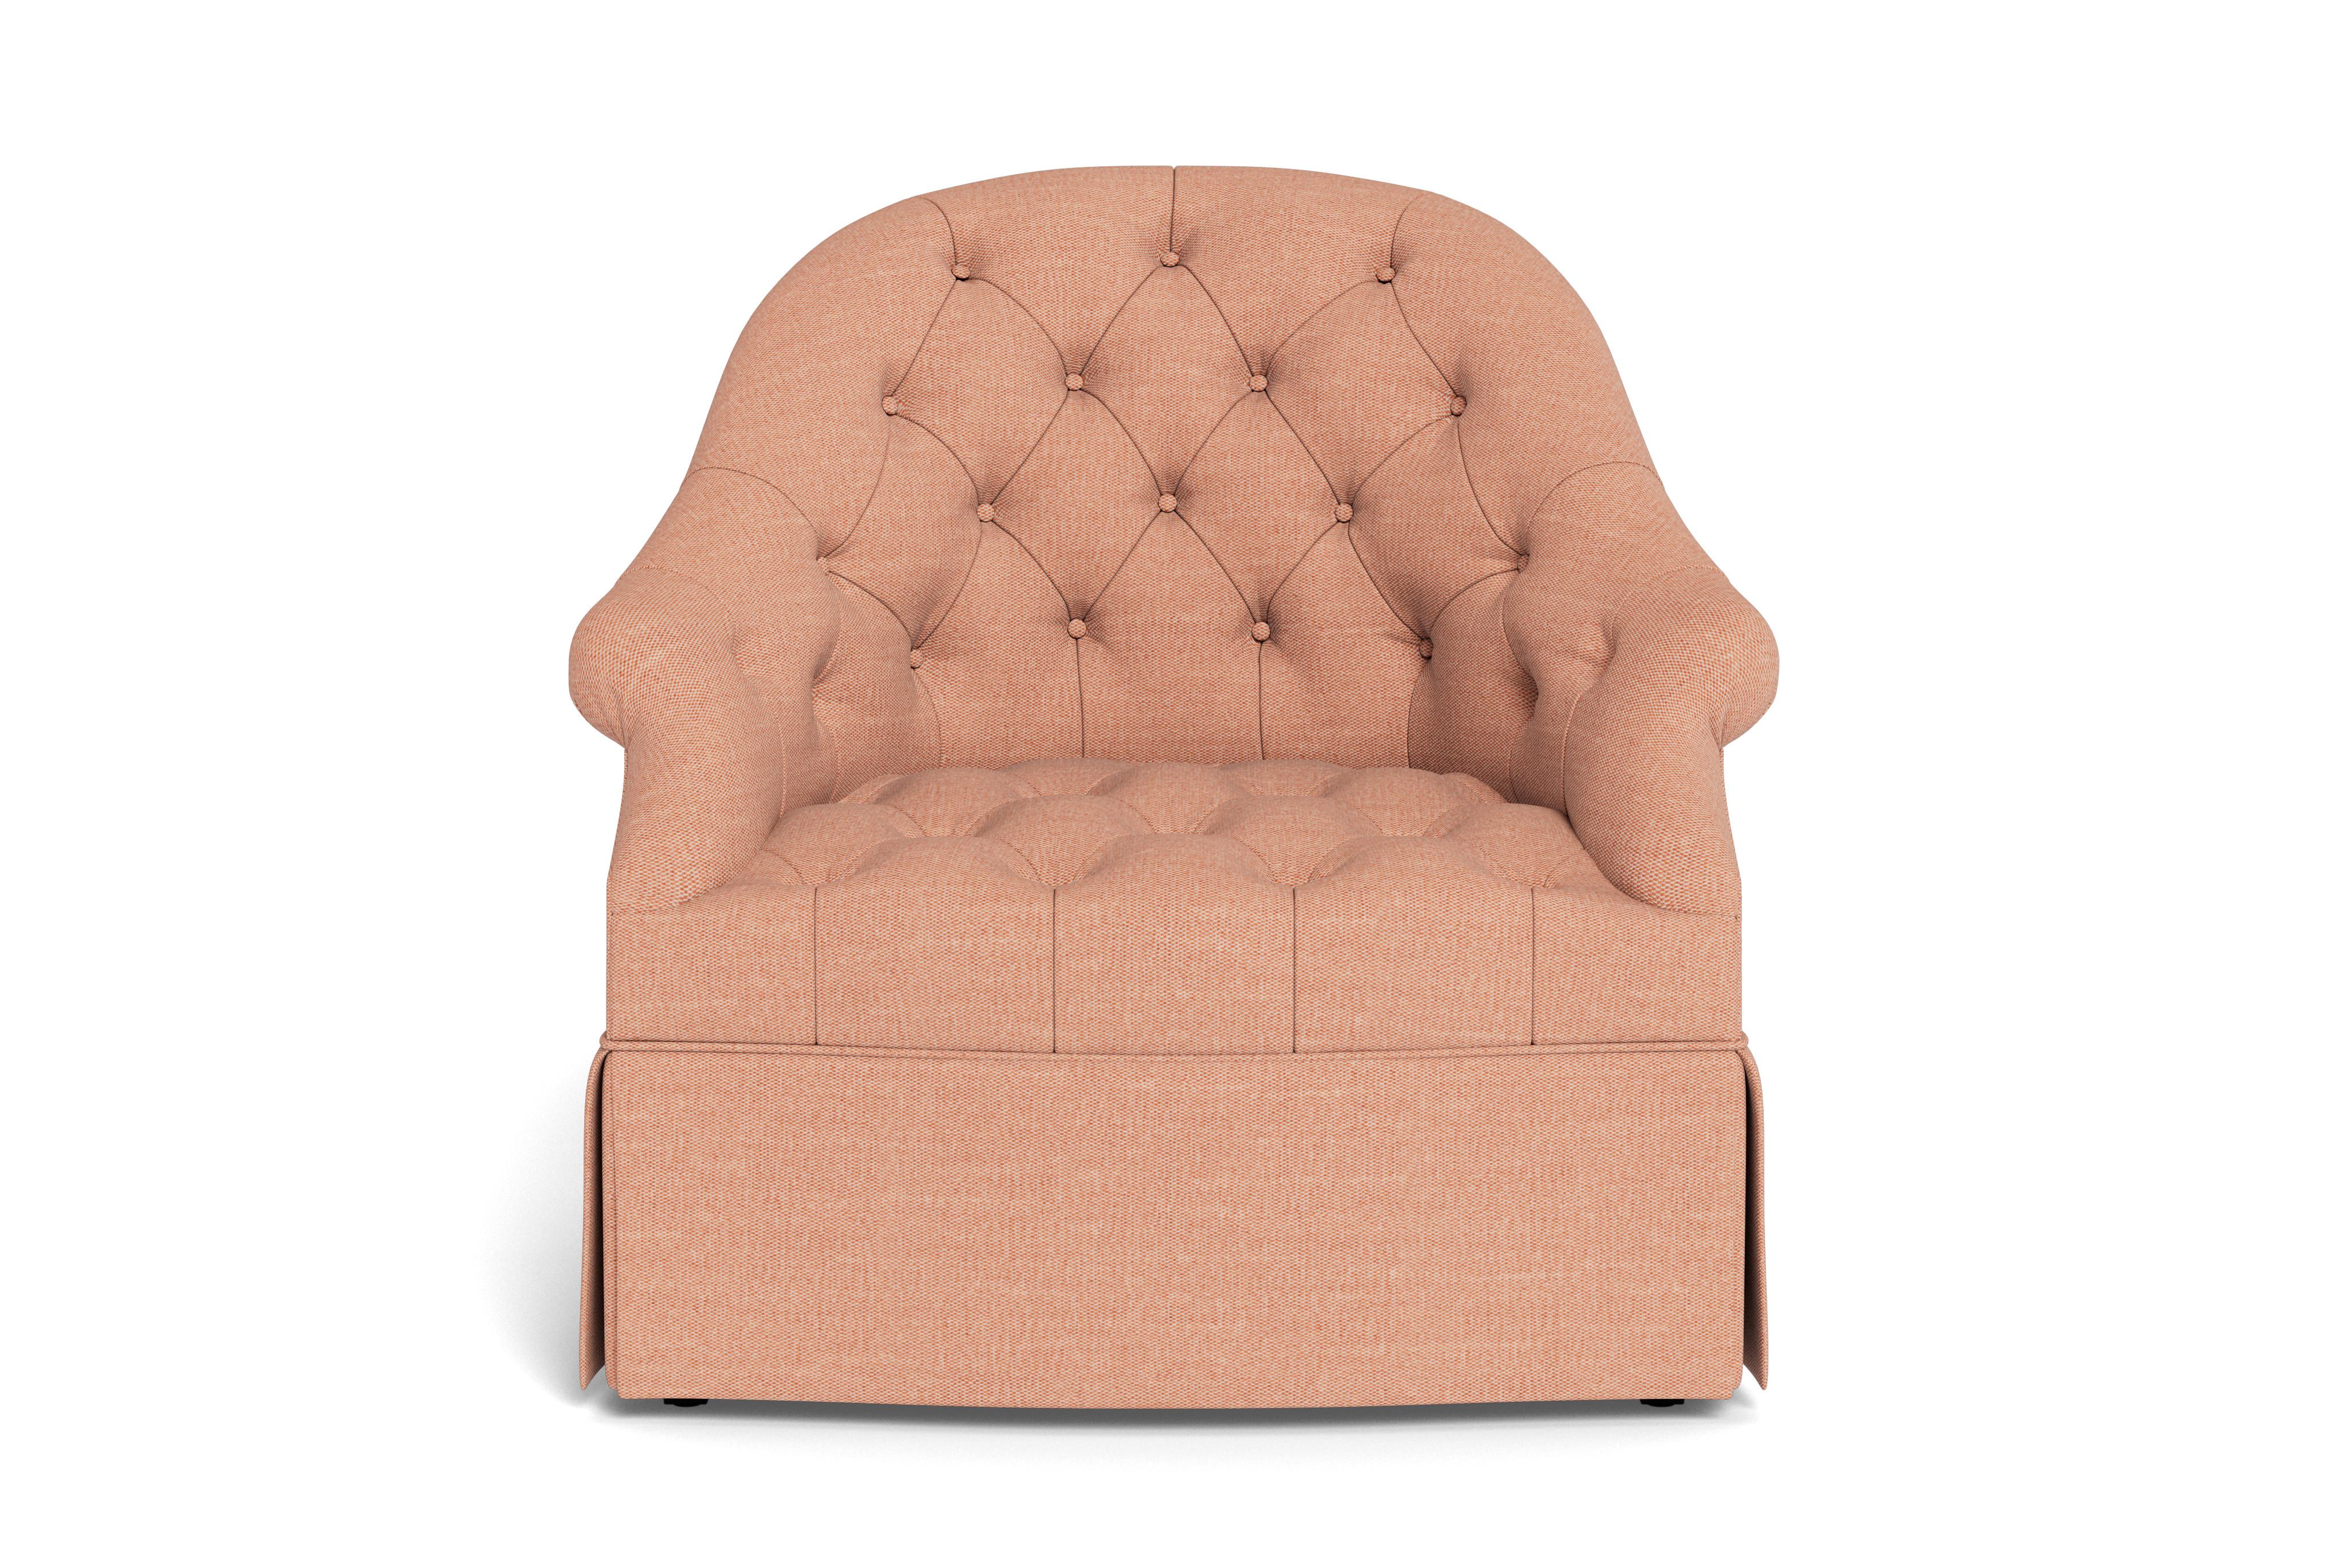 Bunny believes that every room should showcase a mix of upholstery with legs and with skirts to add texture and interest. You'll find it hard to resist its soft embrace, thanks to the curved barrel-shaped hardwood frame. The tufted upholstery is